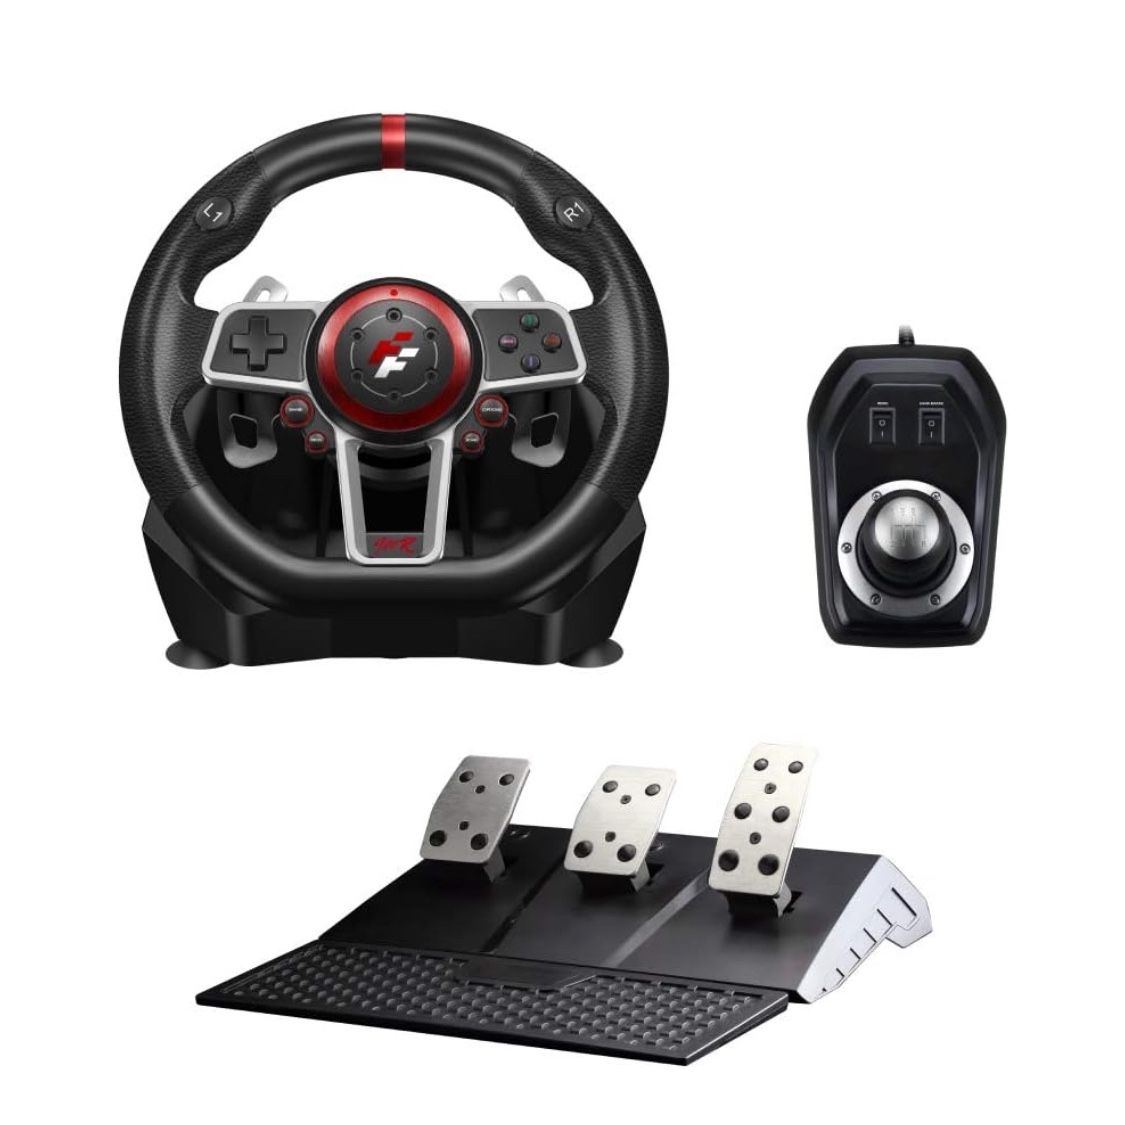 Flashfire Suzuka 900R racing wheel set with Clutch pedals and H-shifter for PC, PS3, PS4, Xbox 360, XBOX ONE and Nintendo Switch